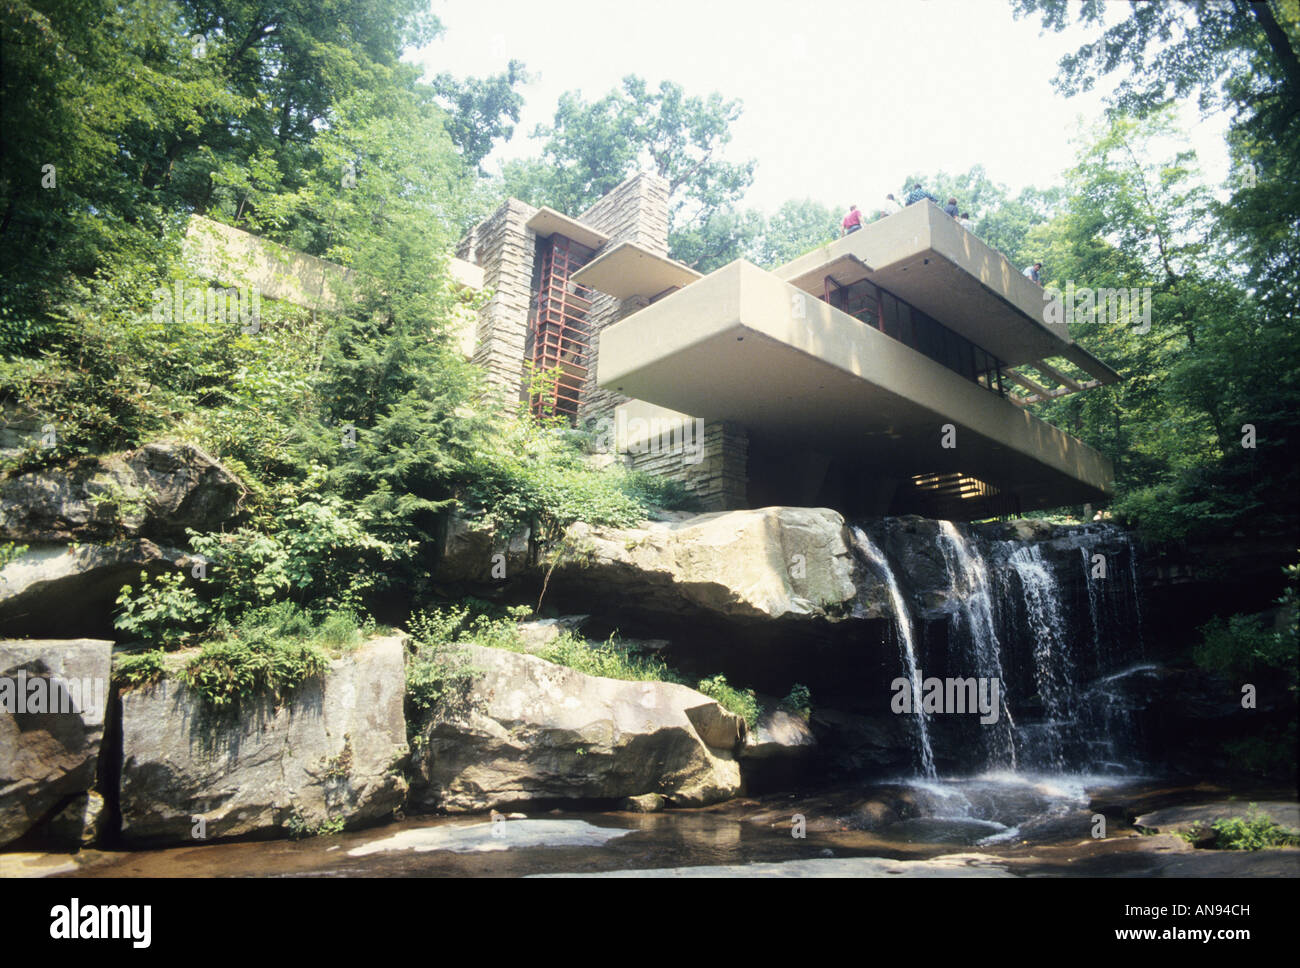 Falling Water, home designed by Frank Lloyd Wright, Pennsylvania USA tourists visit home architecture landmark Stock Photo